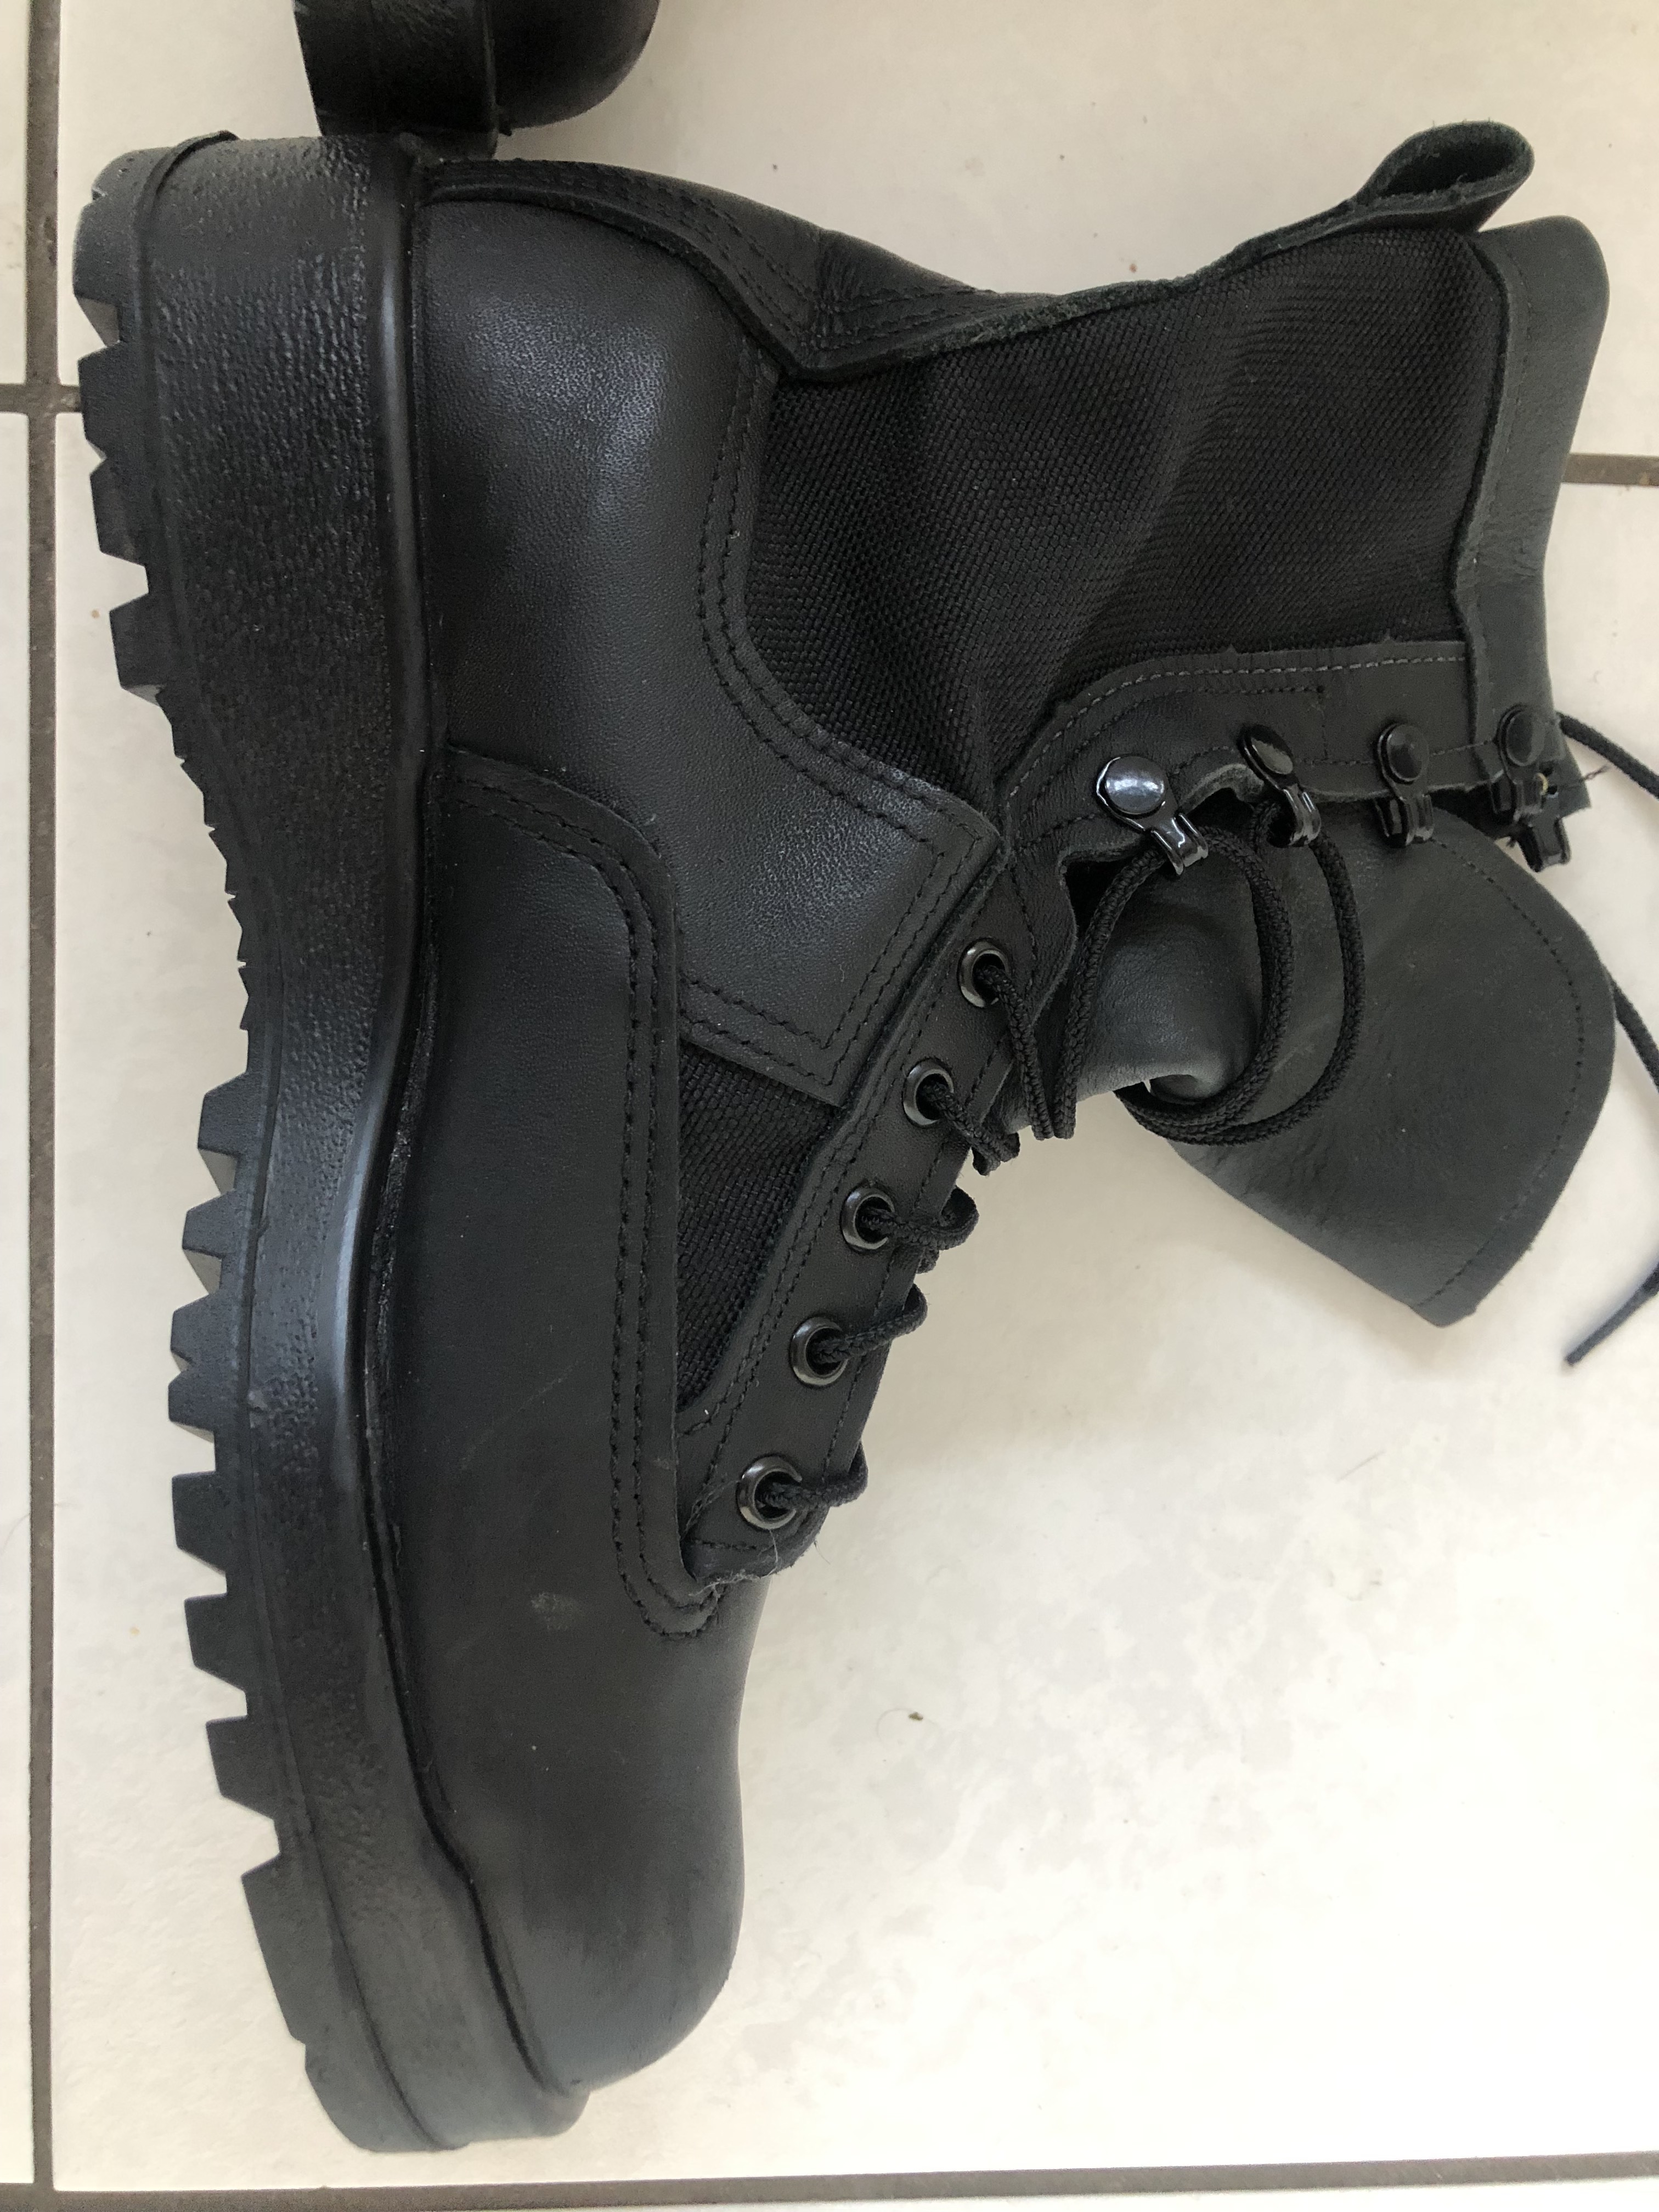 Belleville Combat boots size 5 and size 6.5 - Sales and Wants - Air ...